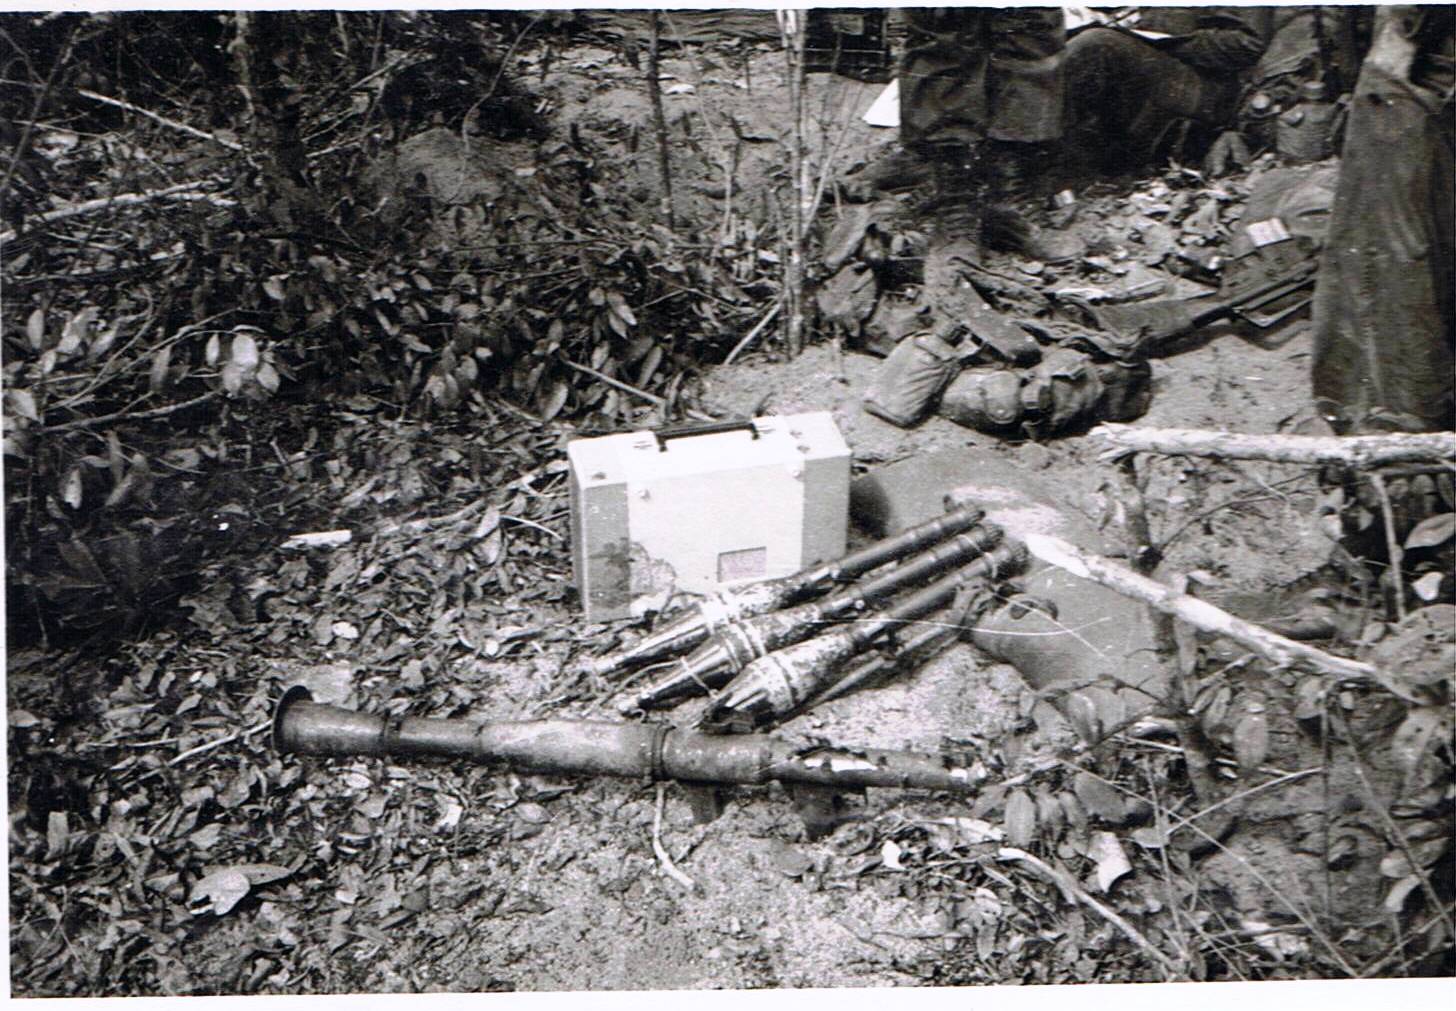 cache found under tree in Light Green area 18 March 1970 [Brooker]